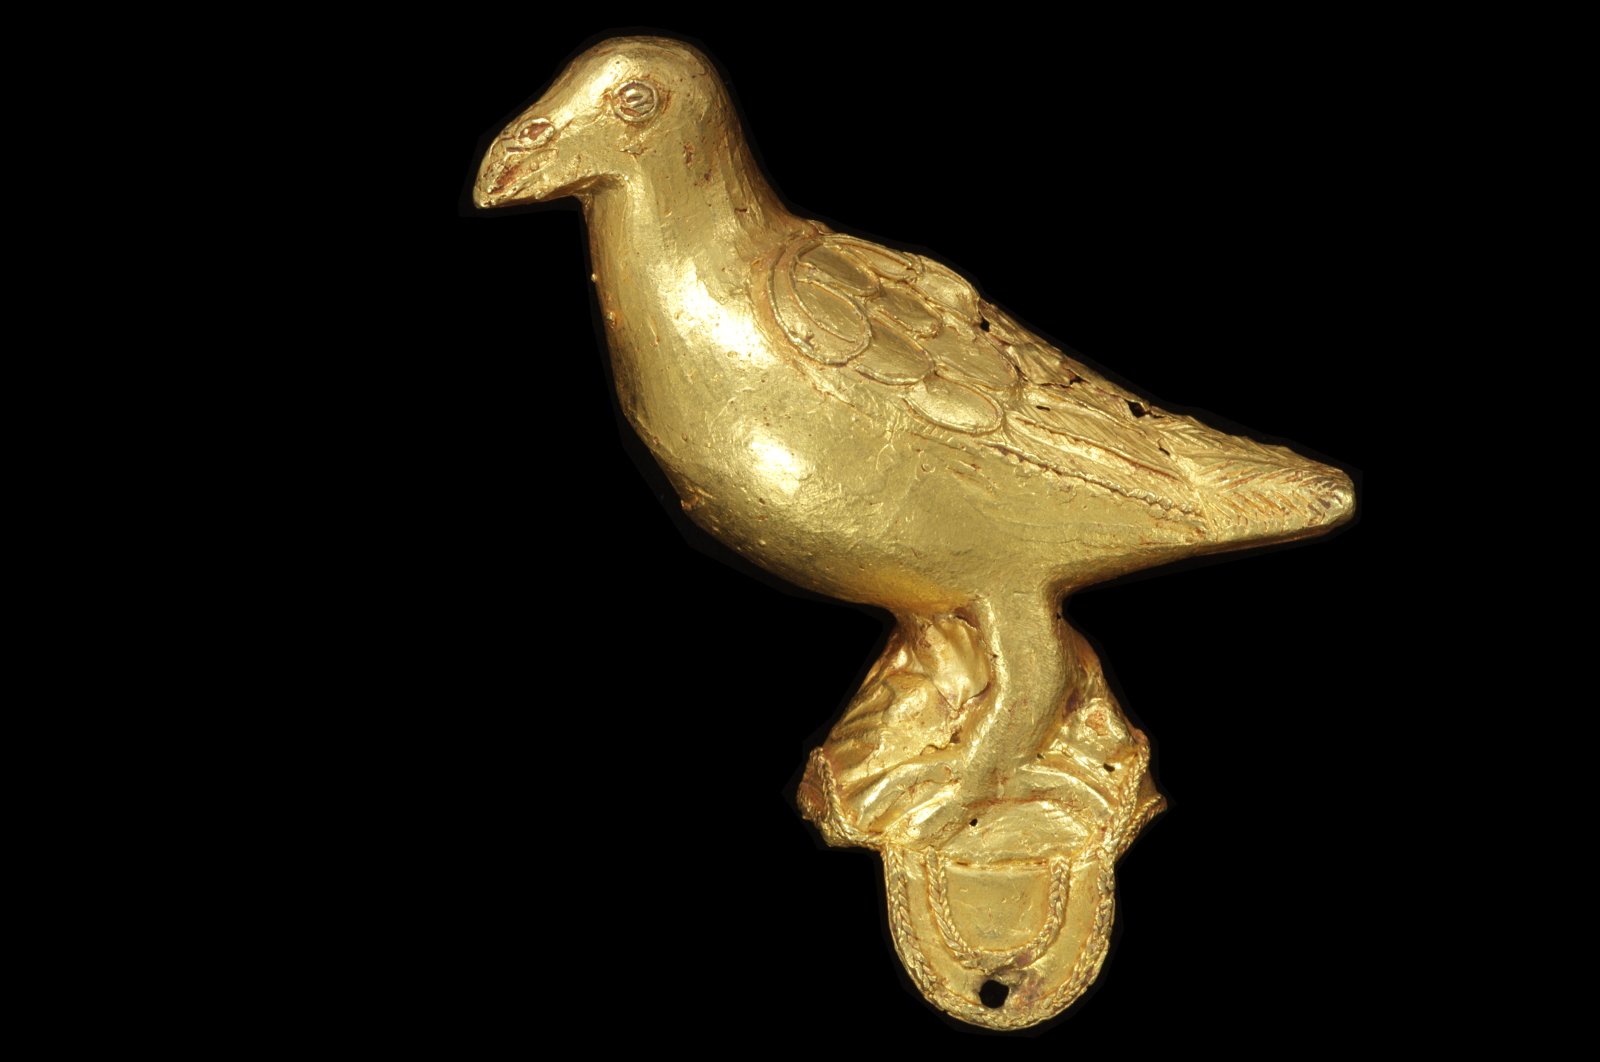 A cast gold ornament, in the form of a bird, probably from a ceremonial hat, originating from Ghana. (AP Photos) 